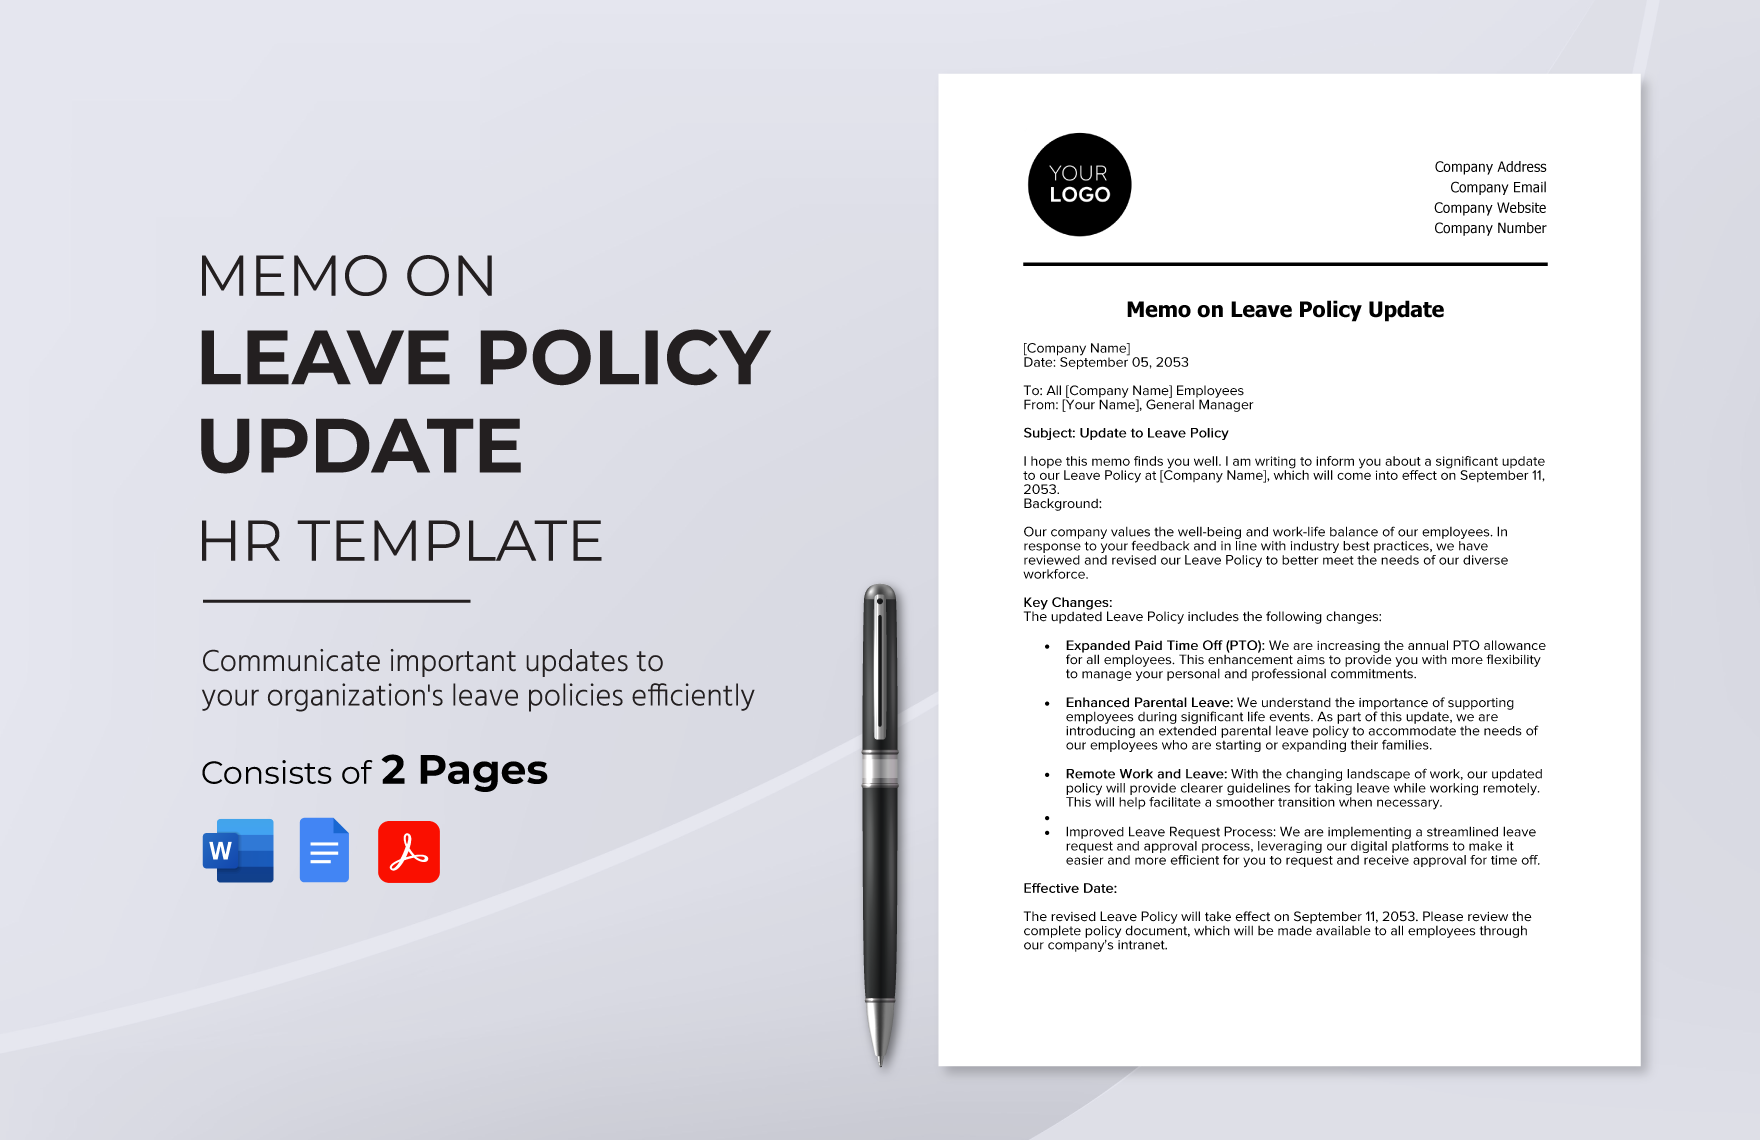 memo-on-leave-policy-update-hr-template